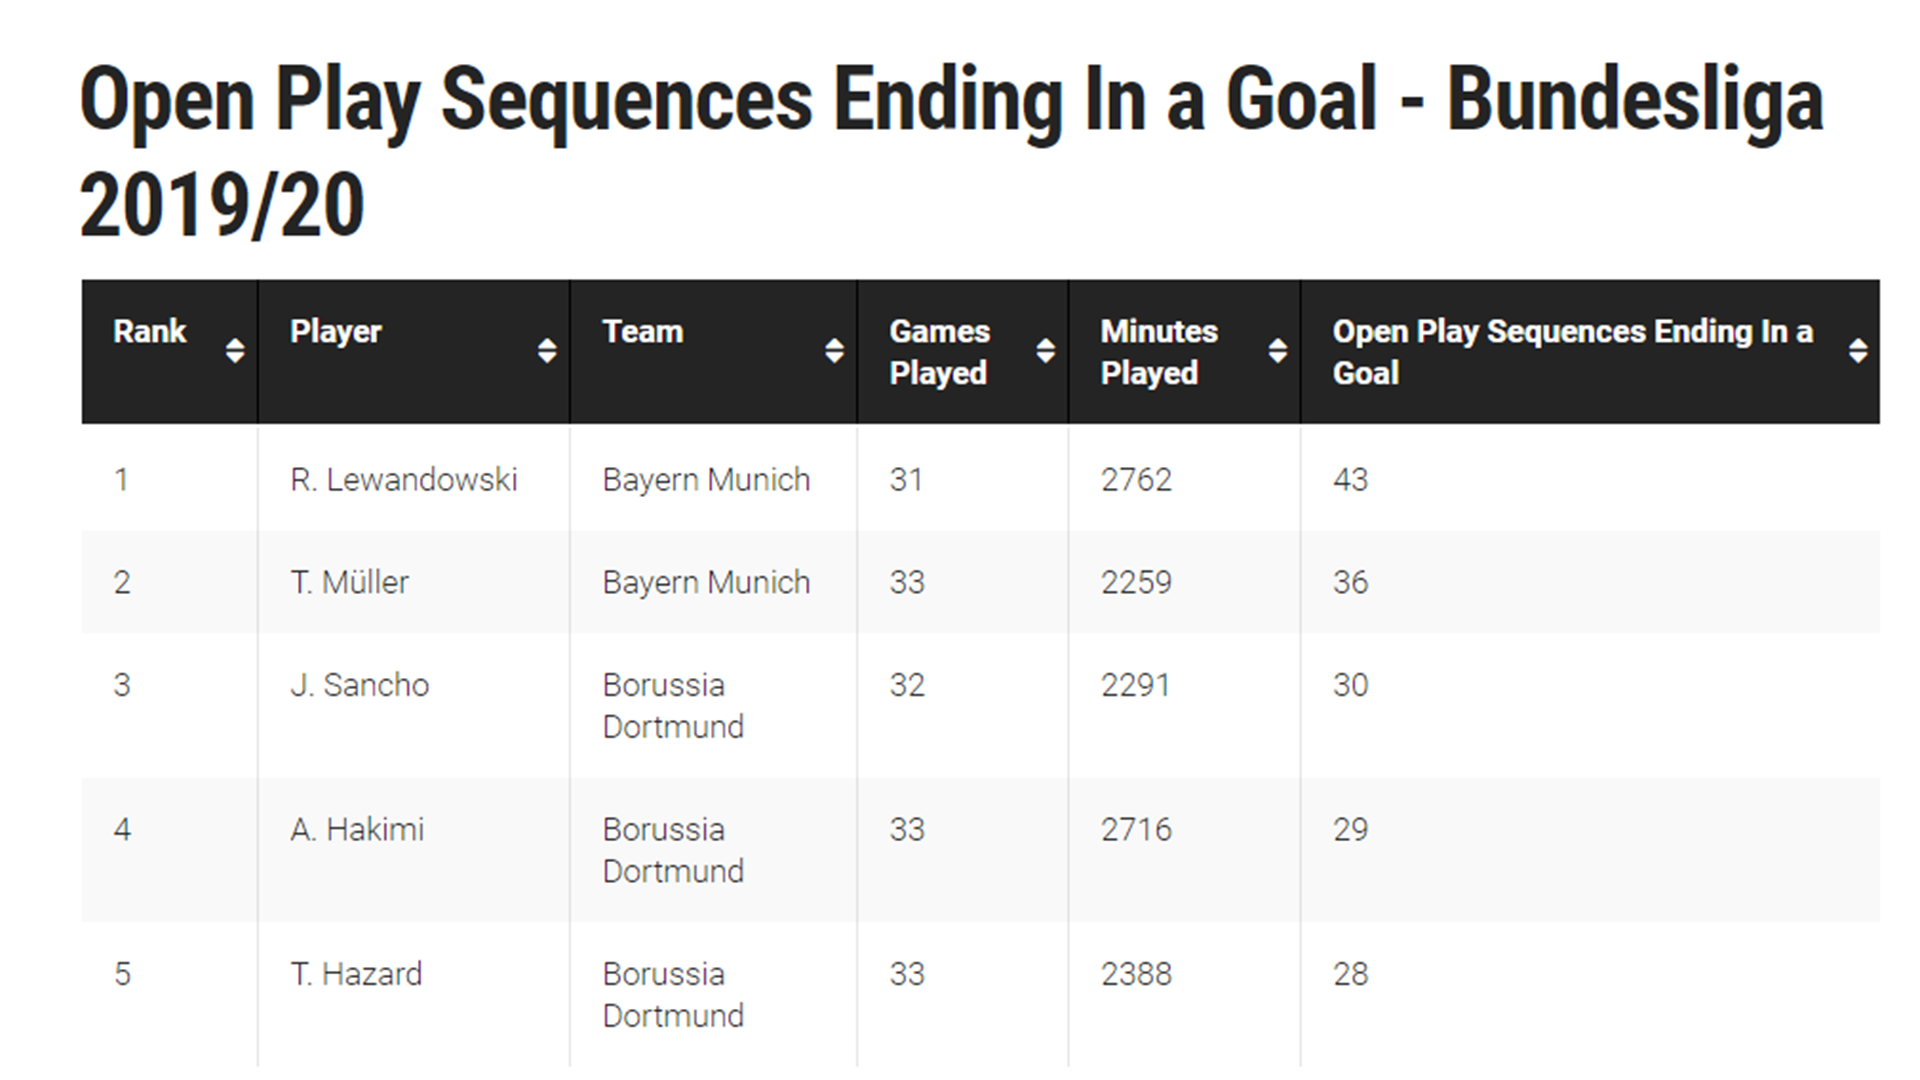 Open-play sequences ending in a goal in the 2019-20 Bundesliga